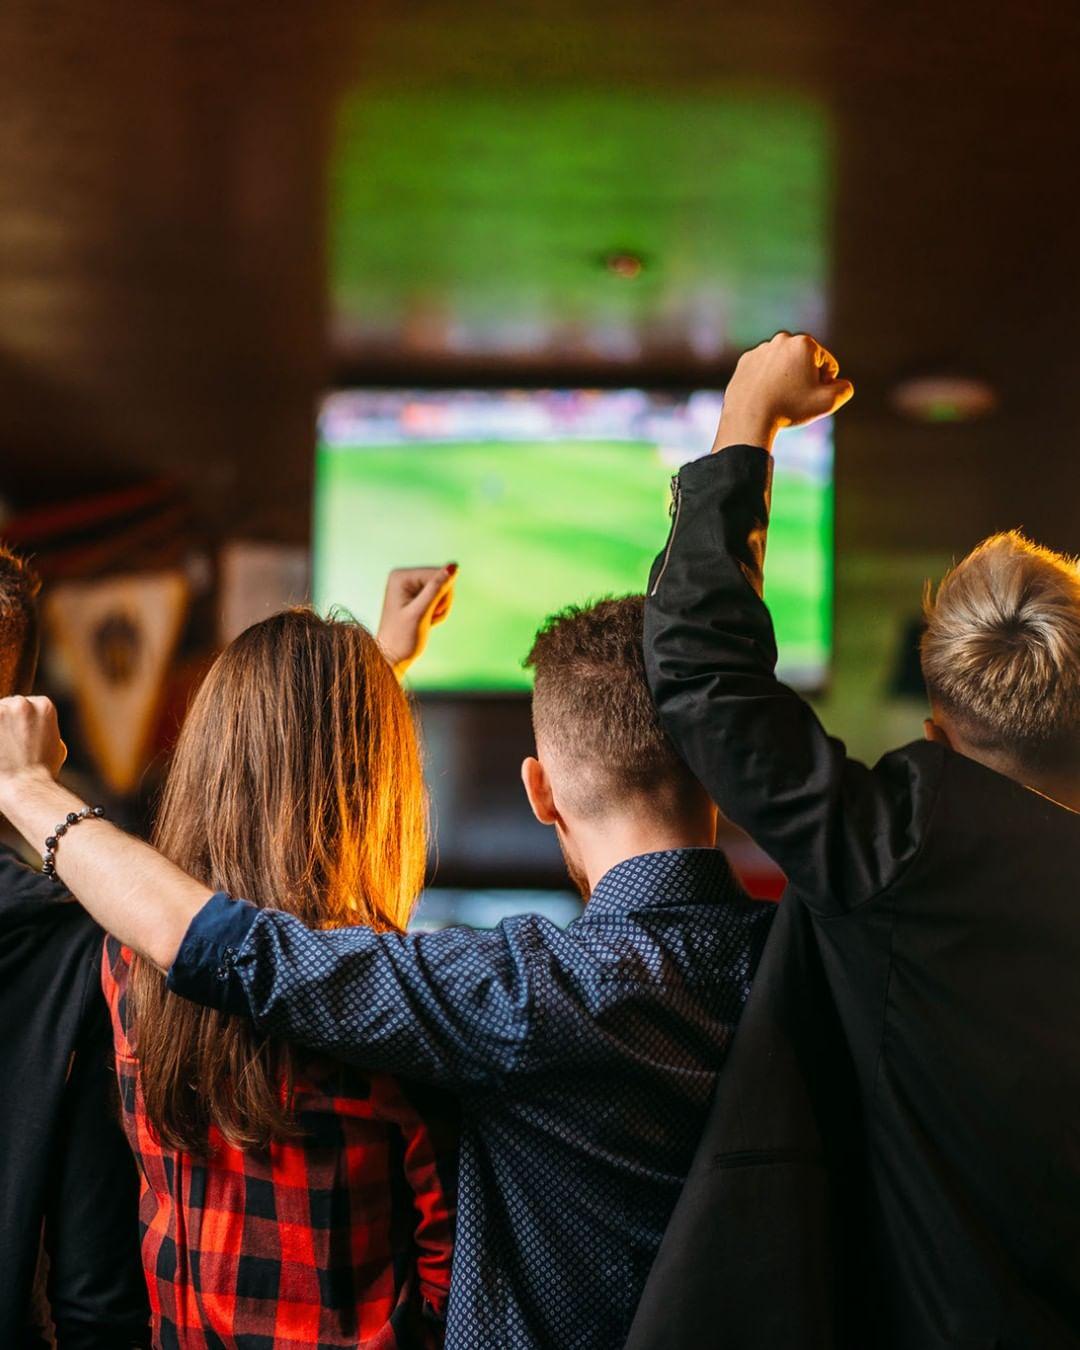 CHEER ON YOUR TEAM AT THESE SPORTS BARS AND PUBS IN DOHA